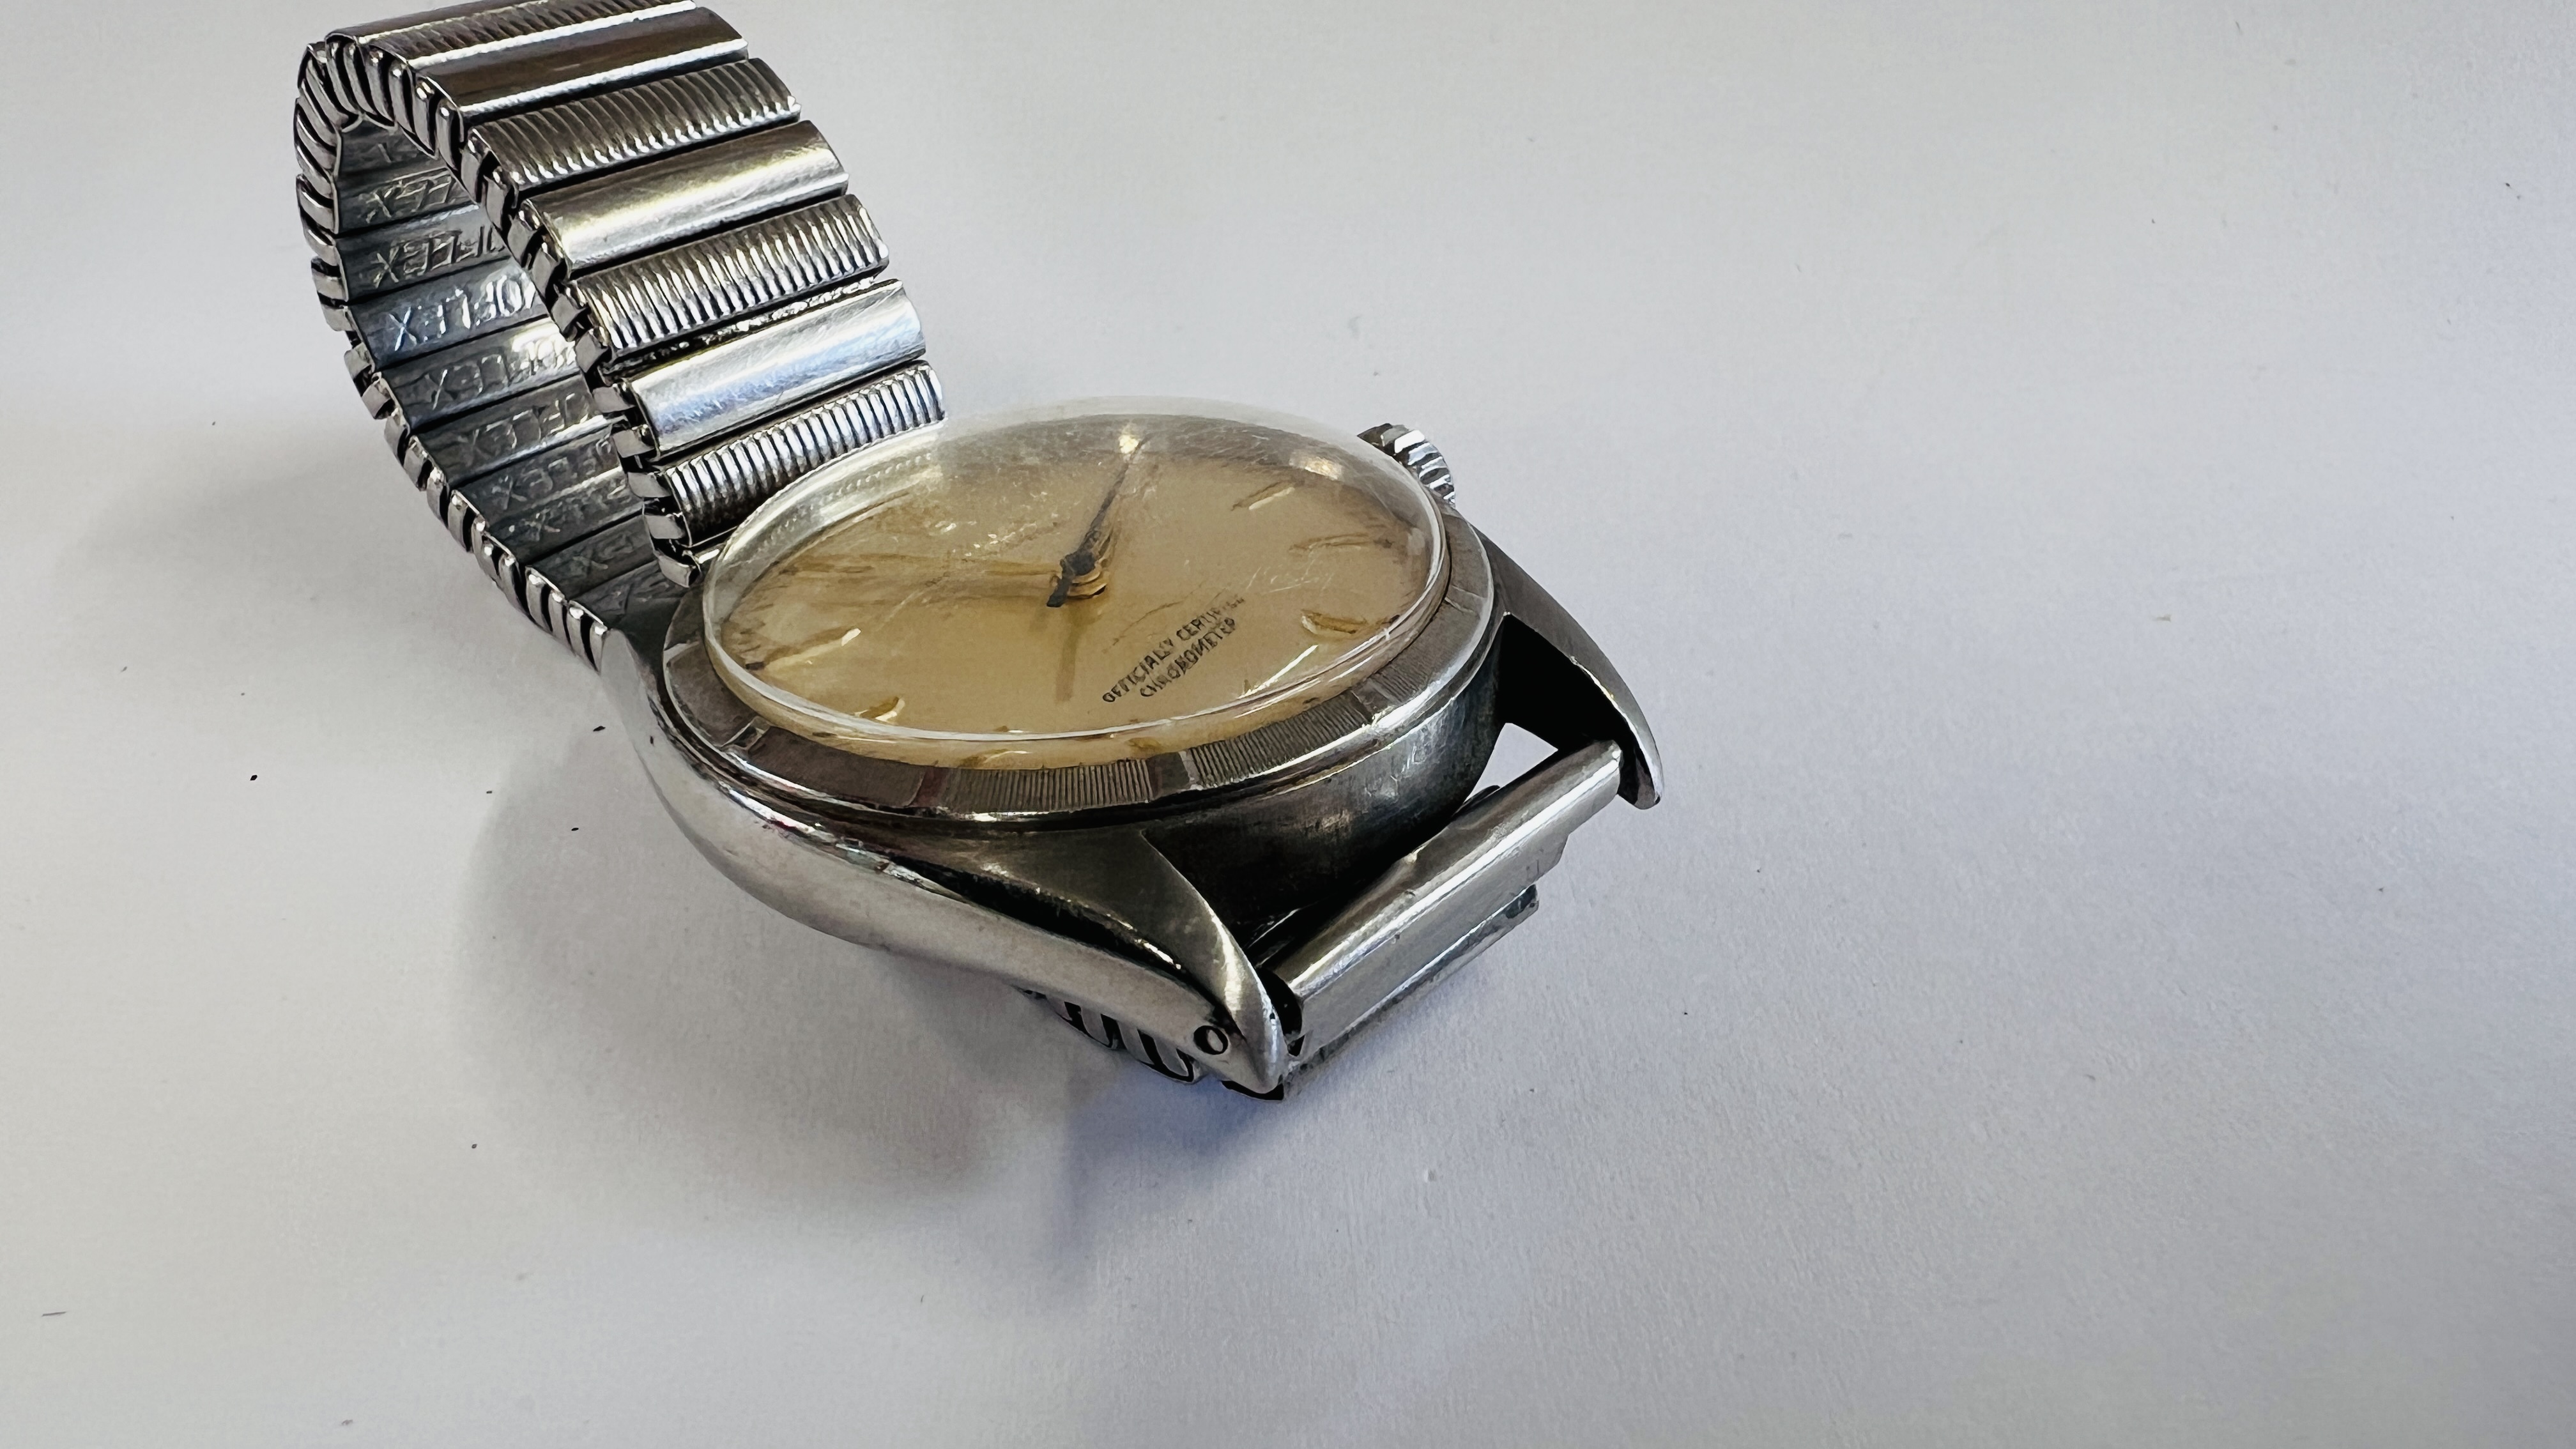 A 1960's ROLEX OYSTER PERPTUAL AUTOMATIC WRIST WATCH ON EXPANDABLE STRAP STAMPED 6085 MODEL F D E - Image 15 of 19